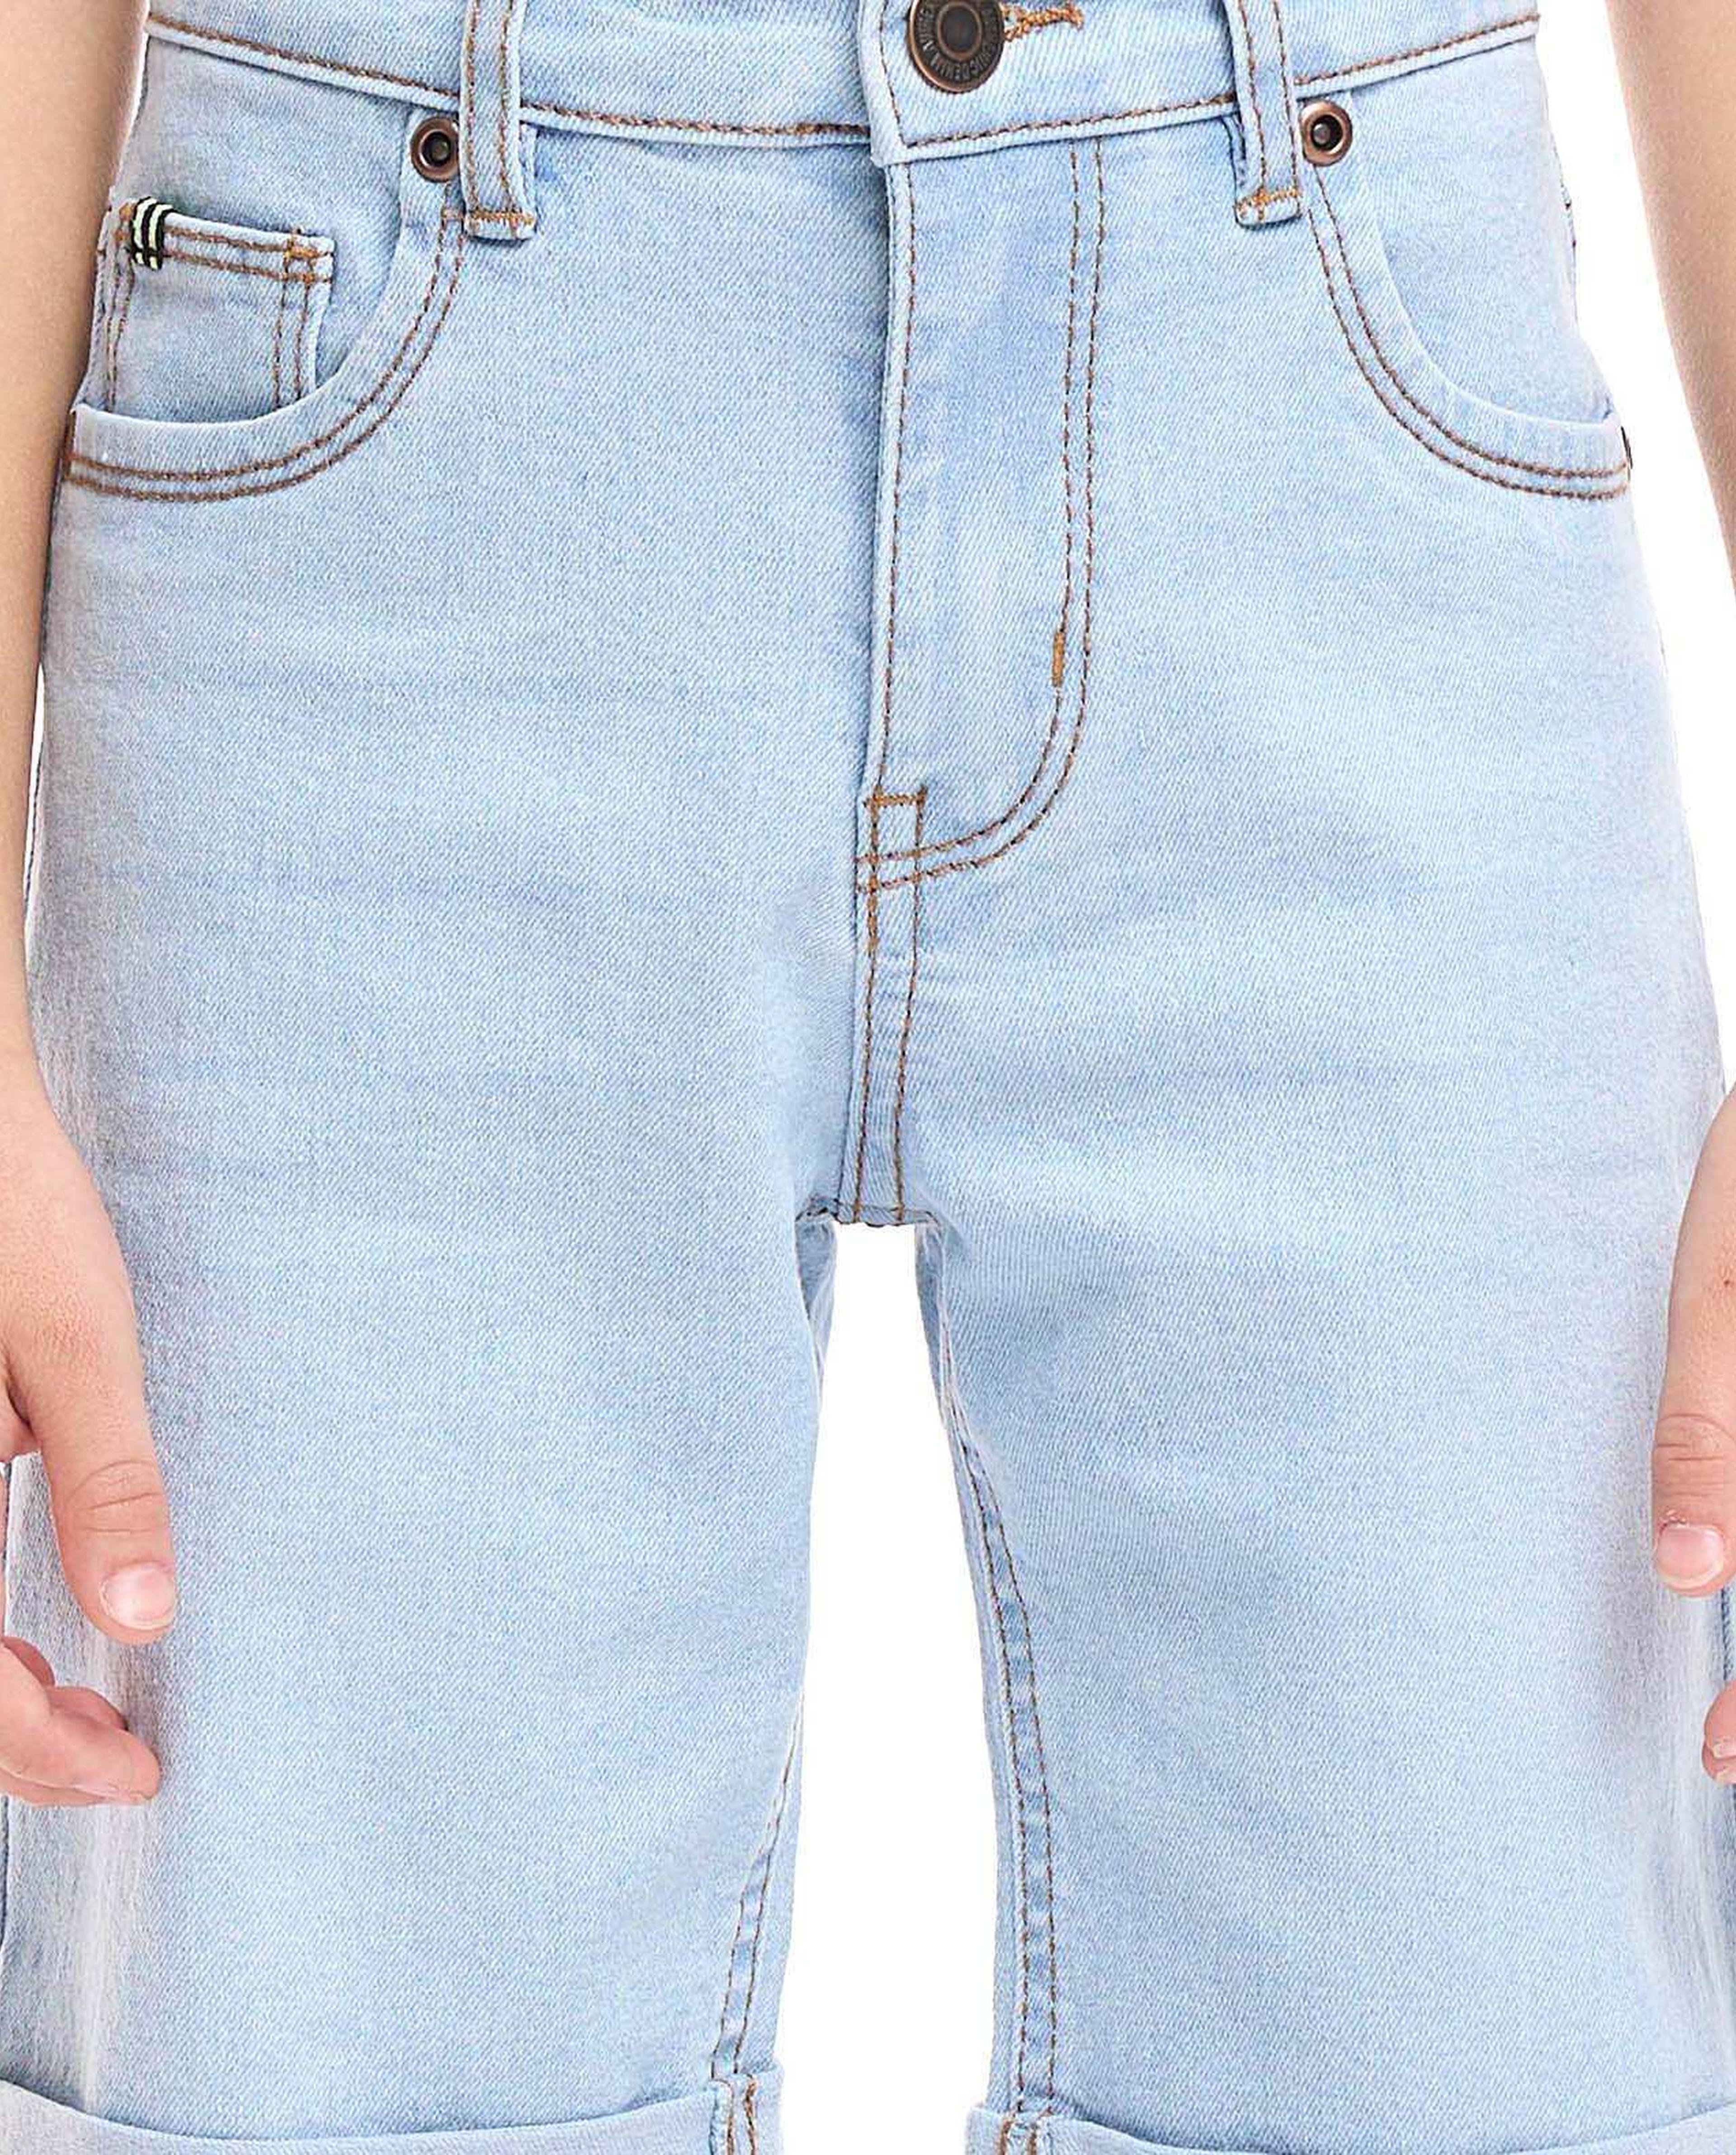 Washed Denim Shorts with Button Closure